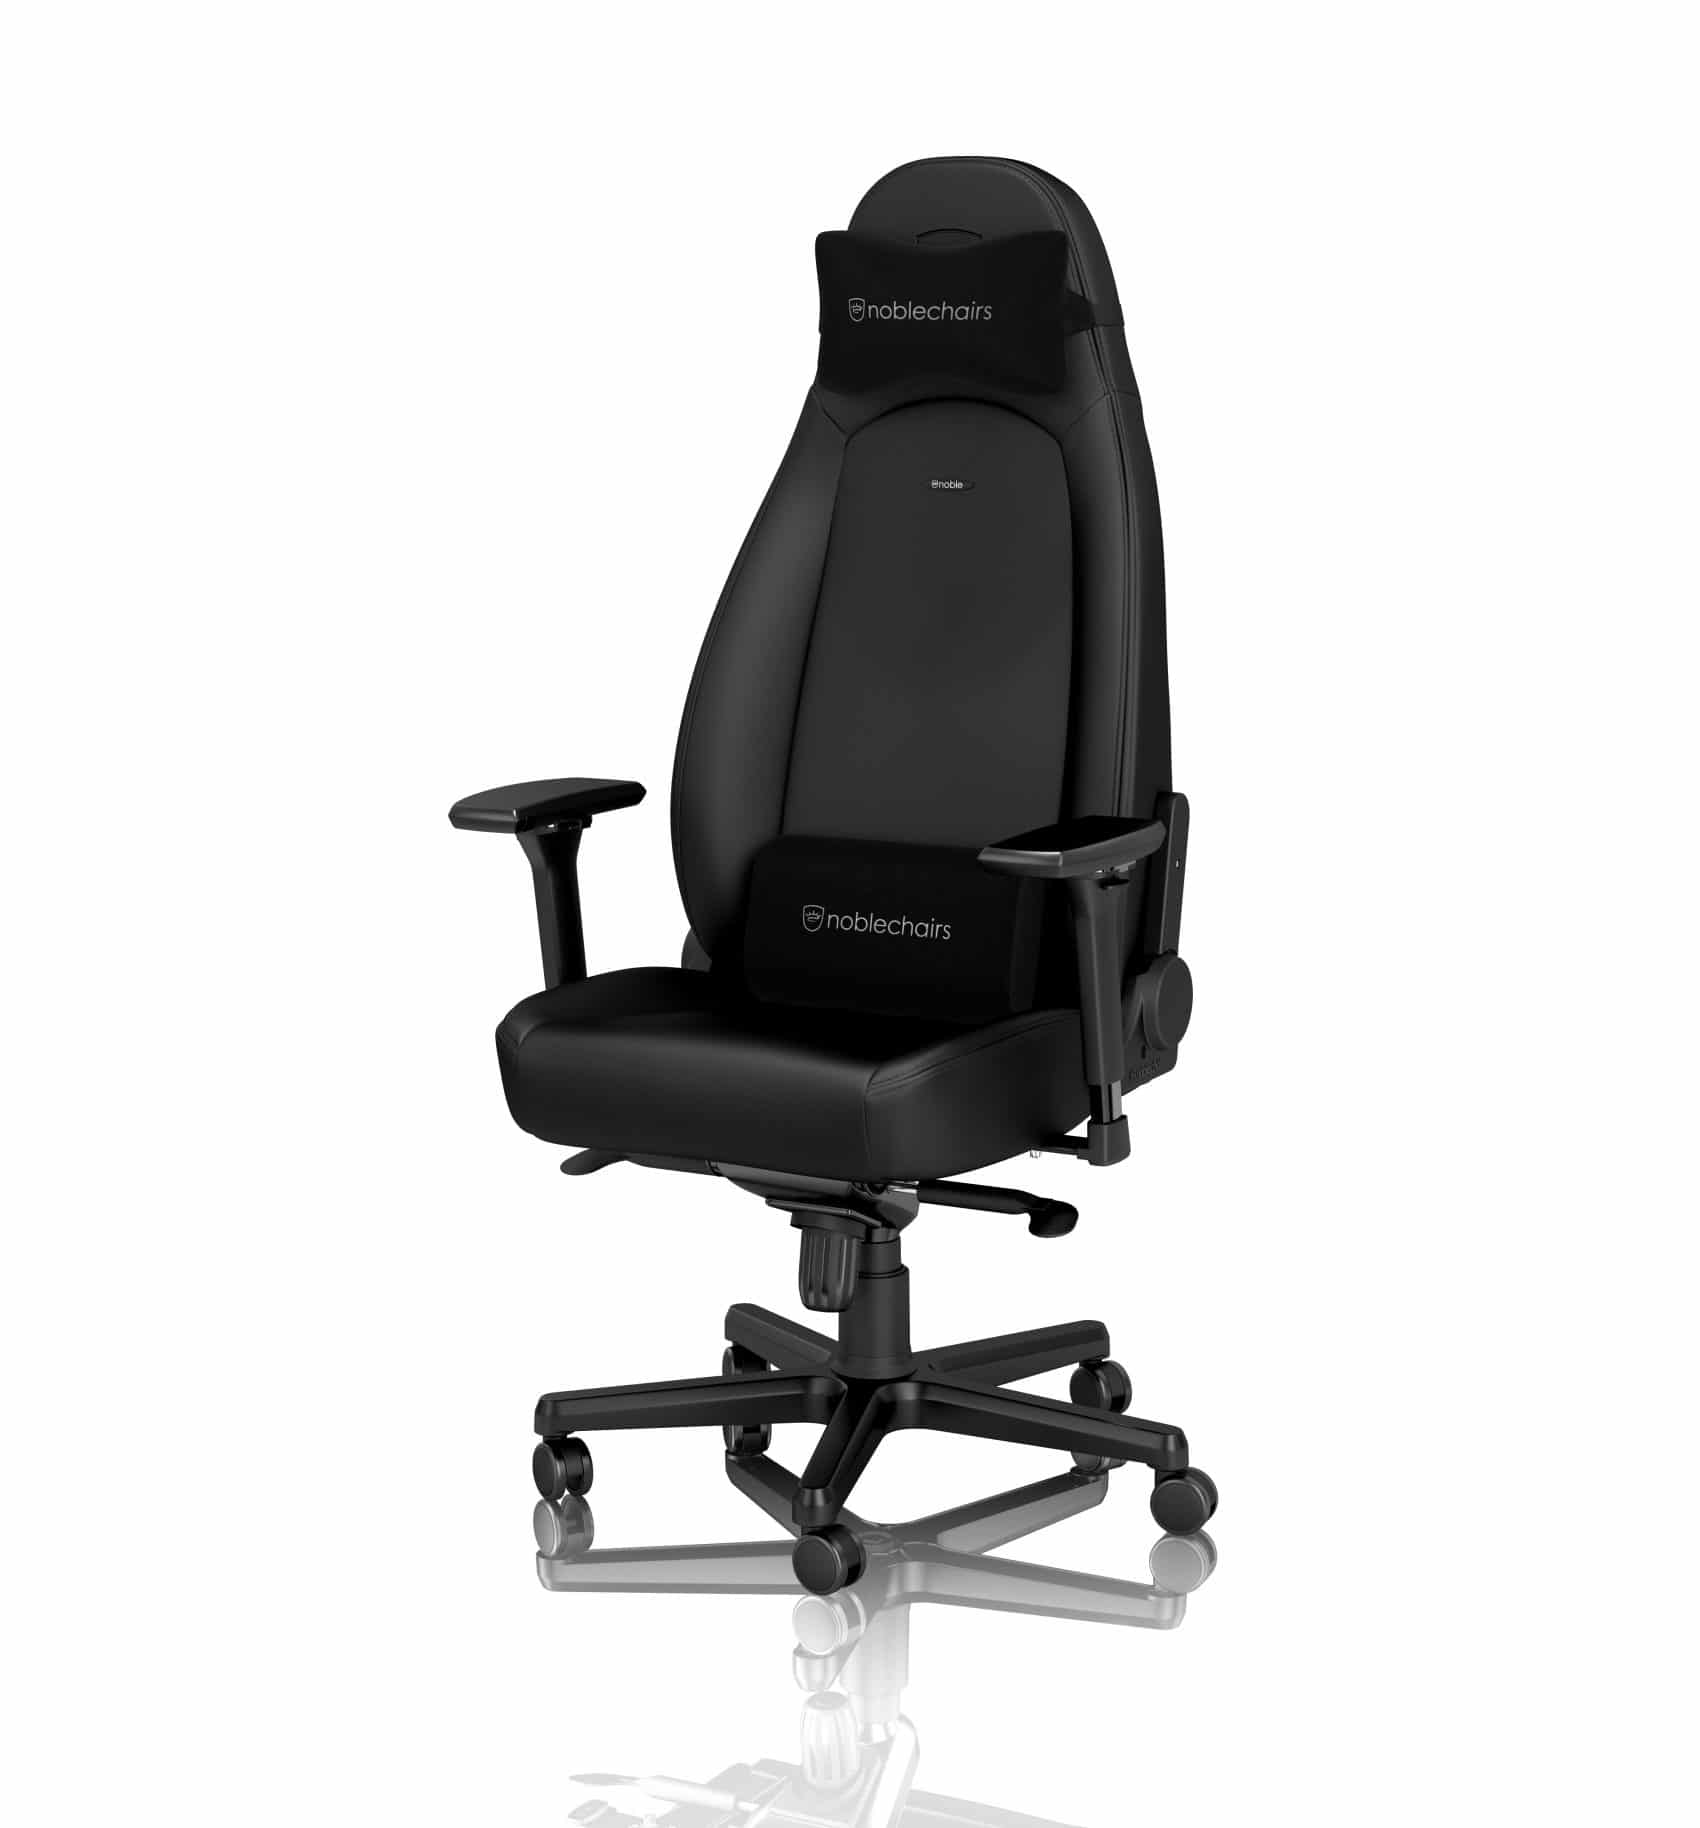 noblechairs Black Edition ICON